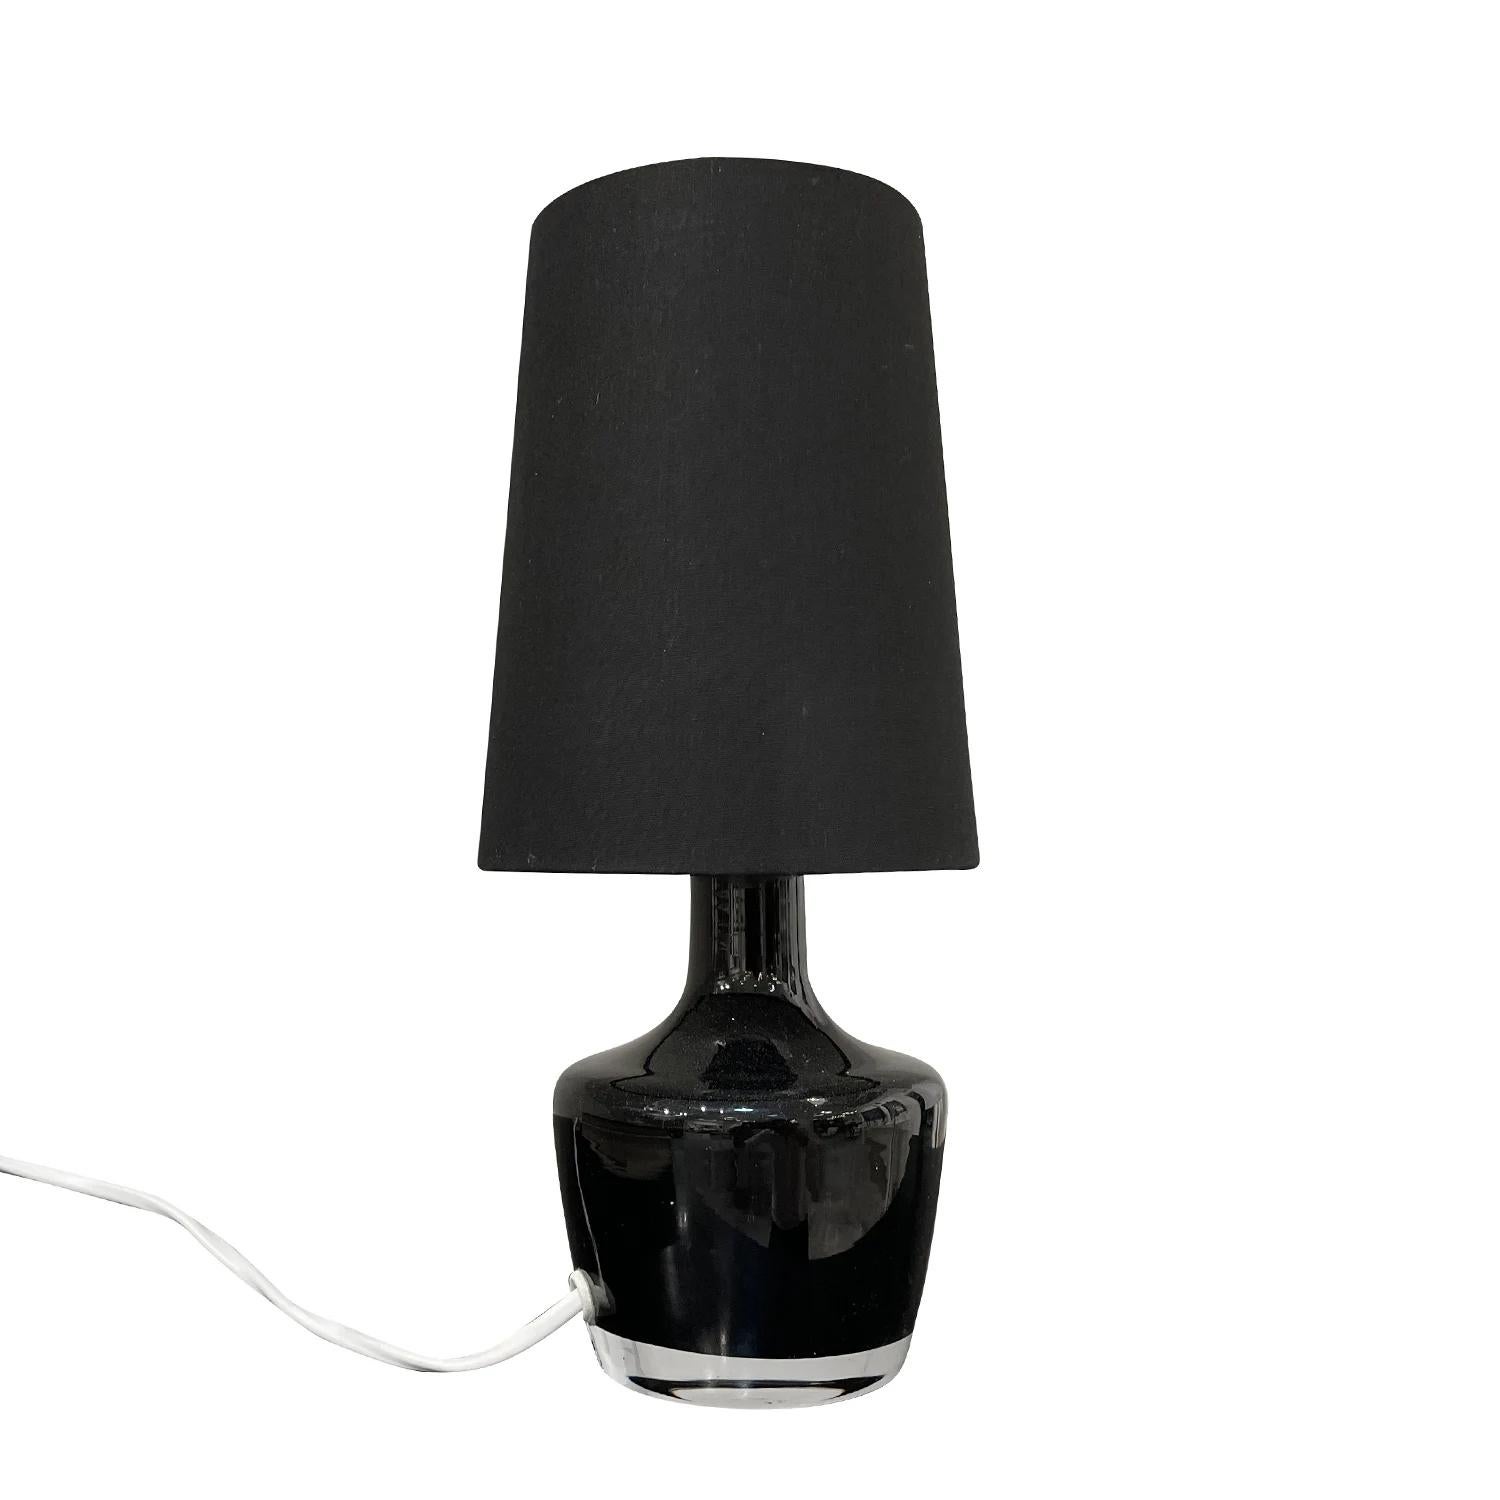 Mid-Century Modern 20th Century Black Swedish Small Glass Office Light by Falkenbergs Belysning For Sale